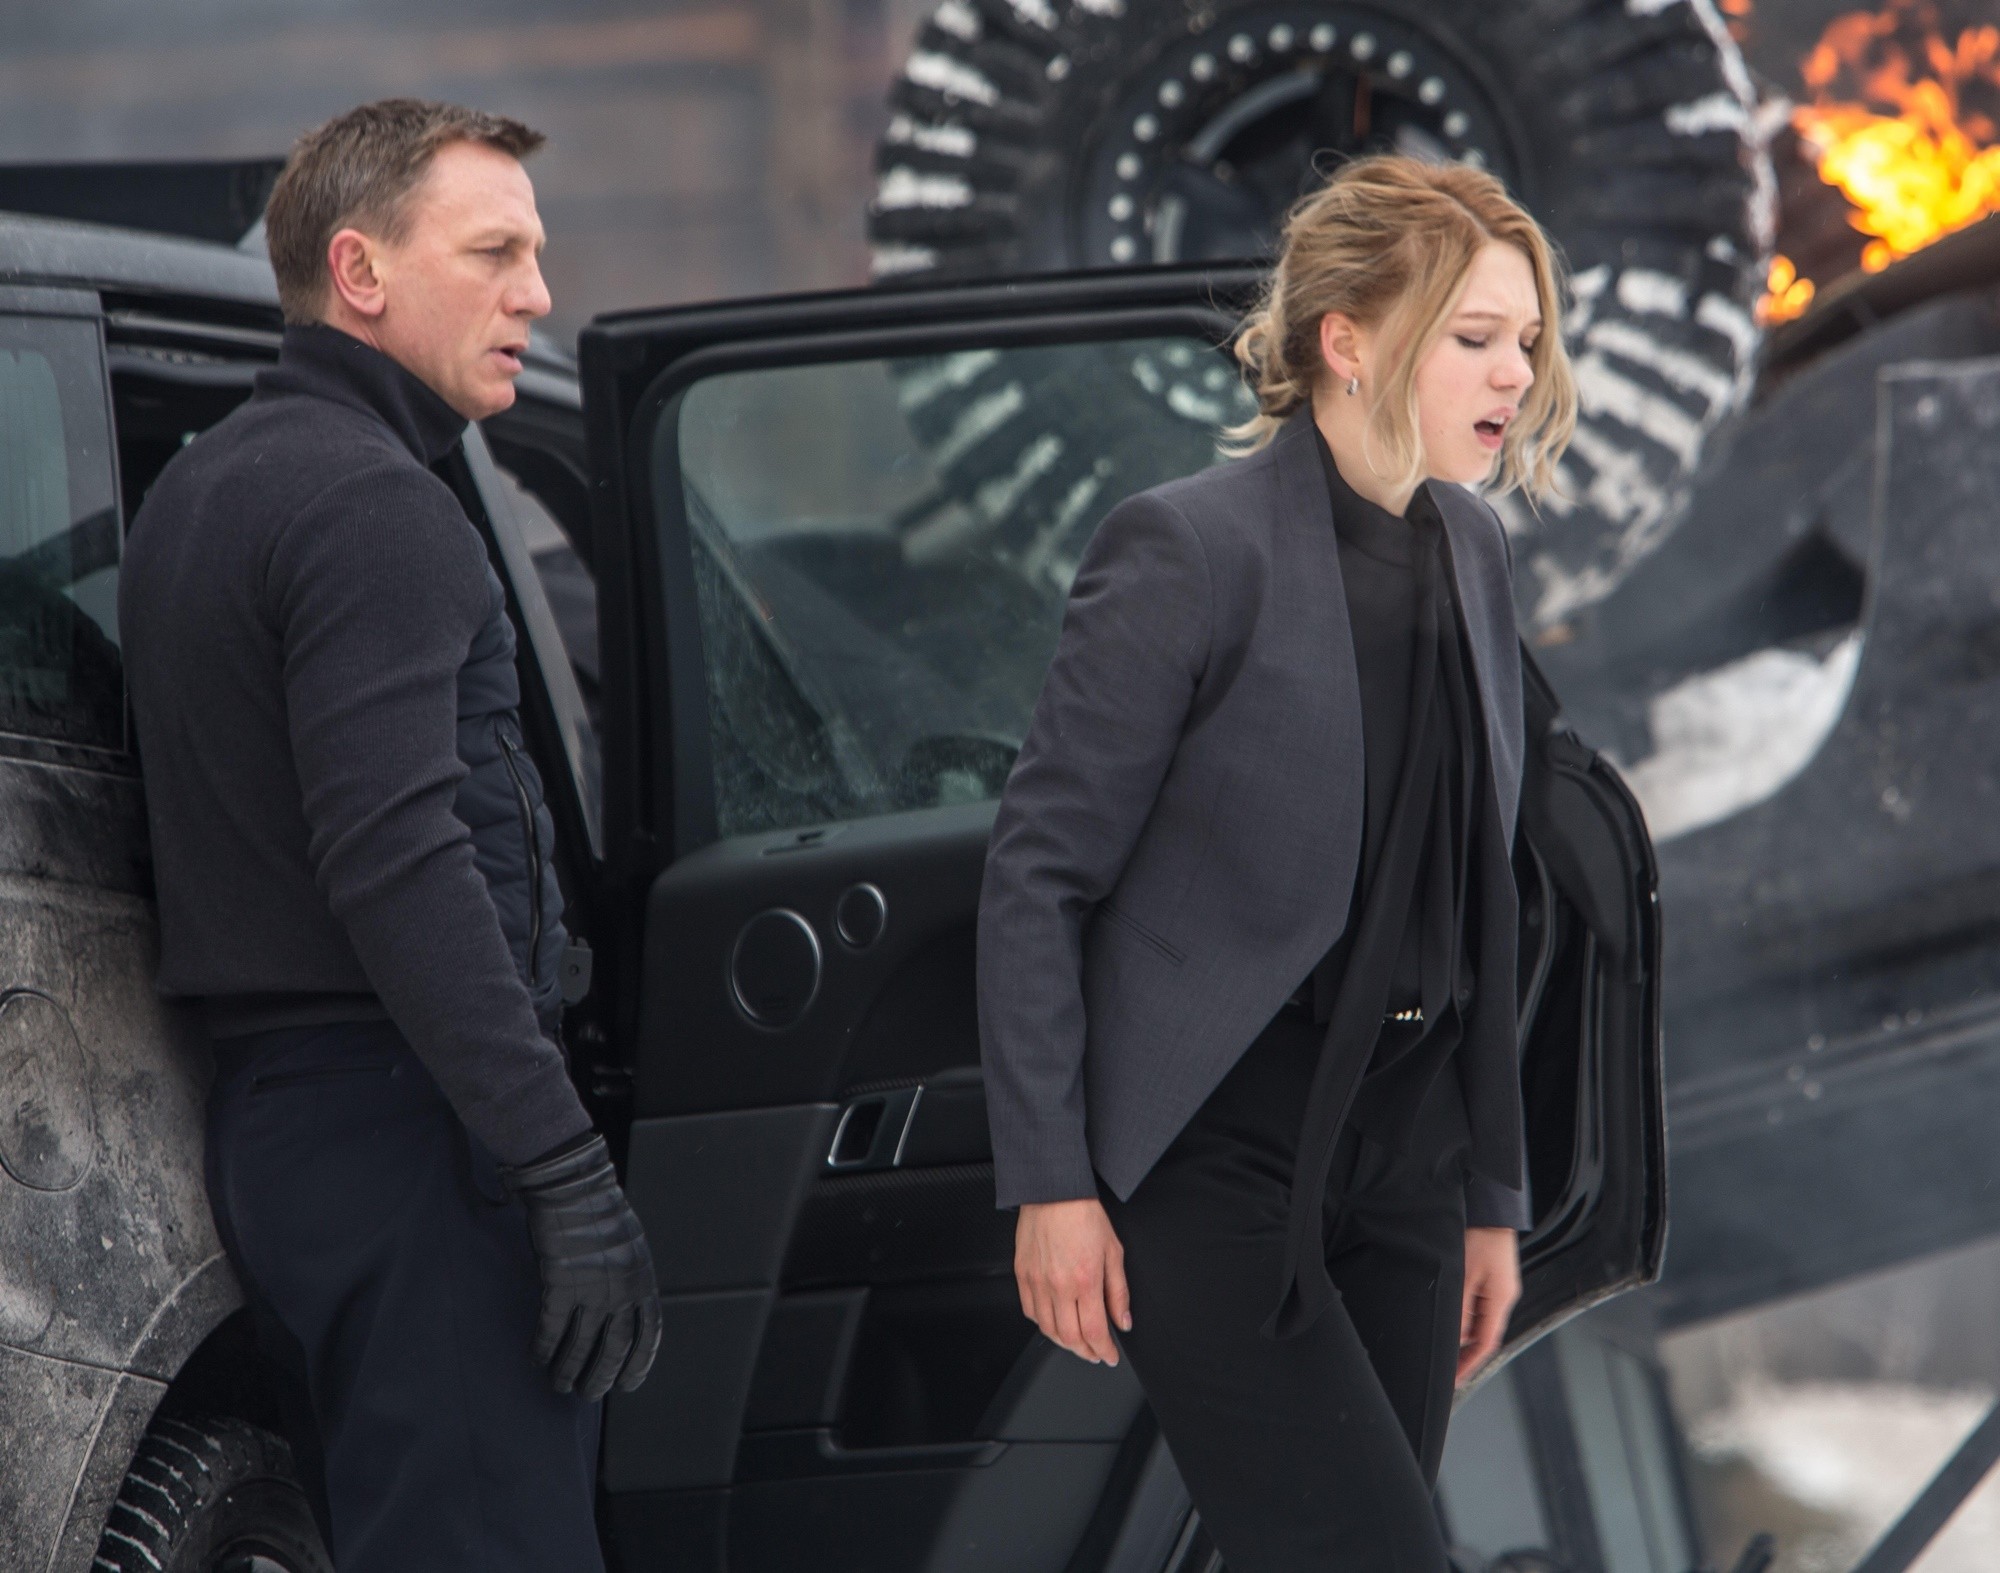 Daniel Craig stars as James Bond and Lea Seydoux stars as Madeleine Swann in Sony Pictures' Spectre (2015)